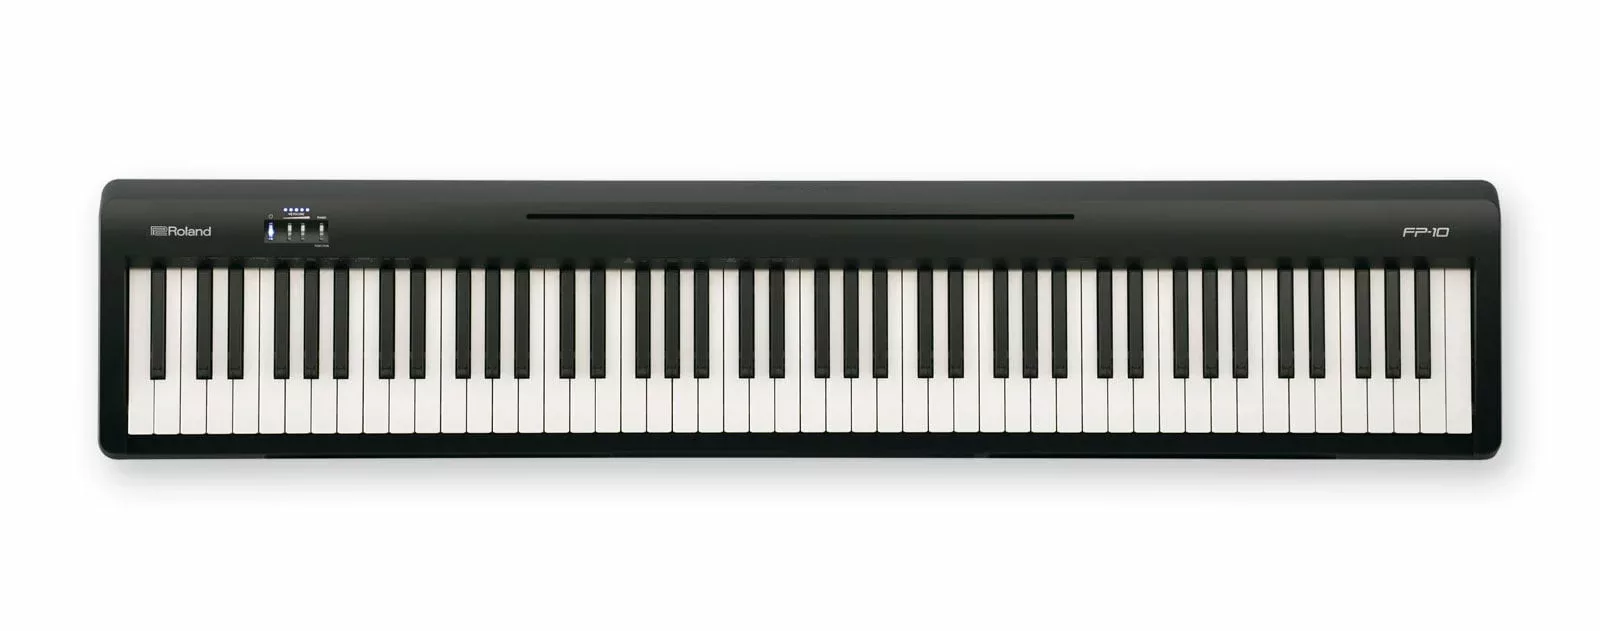 roland fp-10 top-down view